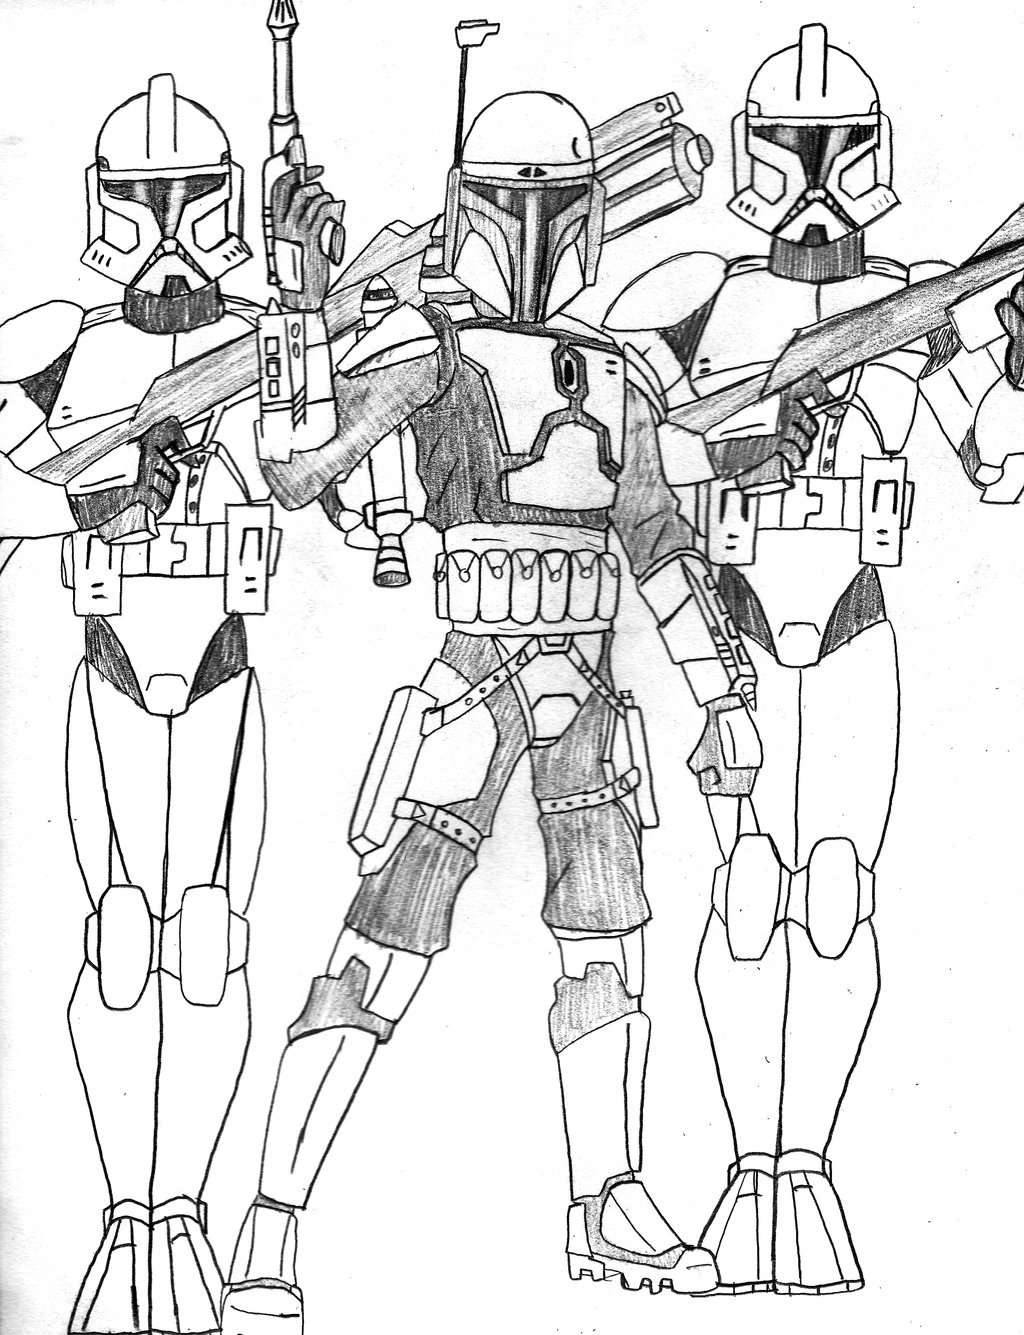 Clone Trooper Coloring Pages To Print Might Be A Fun Activity To Do Among S...